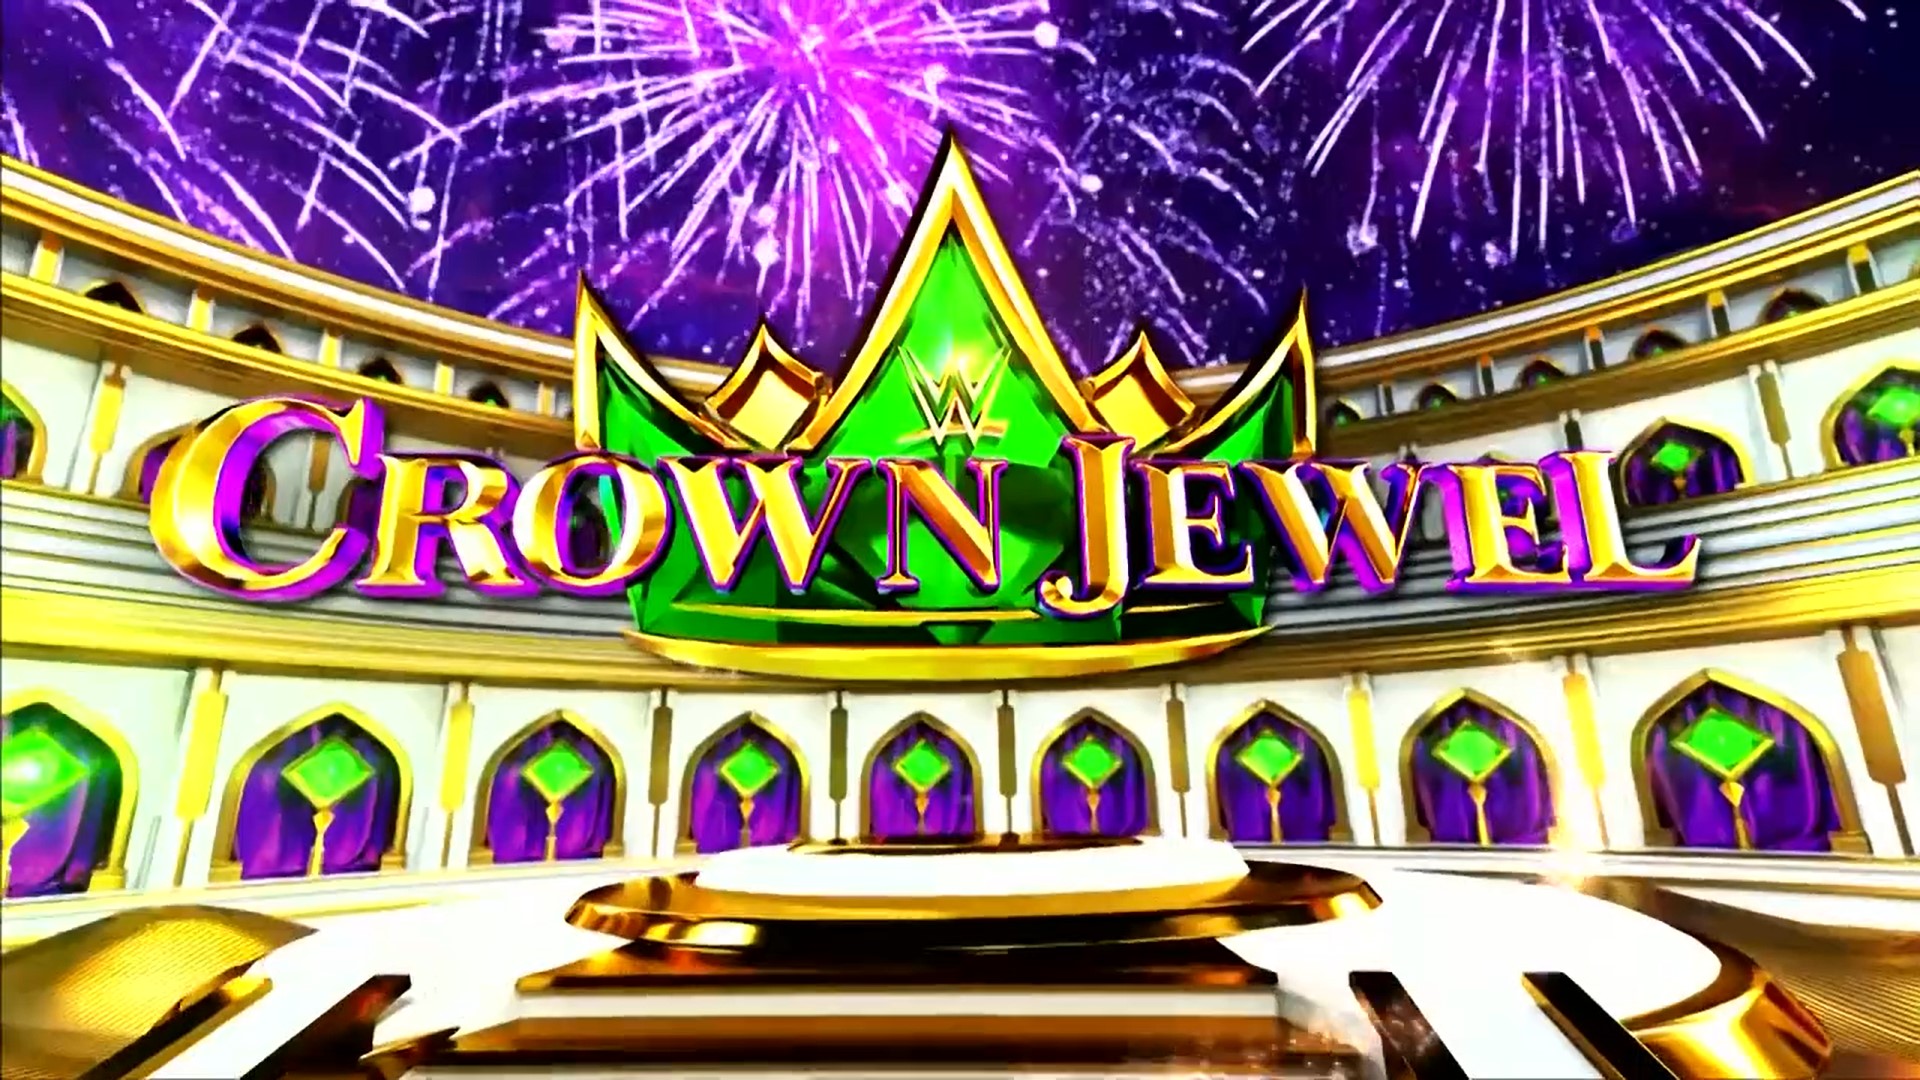 WWE Crown Jewel Start Time And How To Watch Online vlr.eng.br